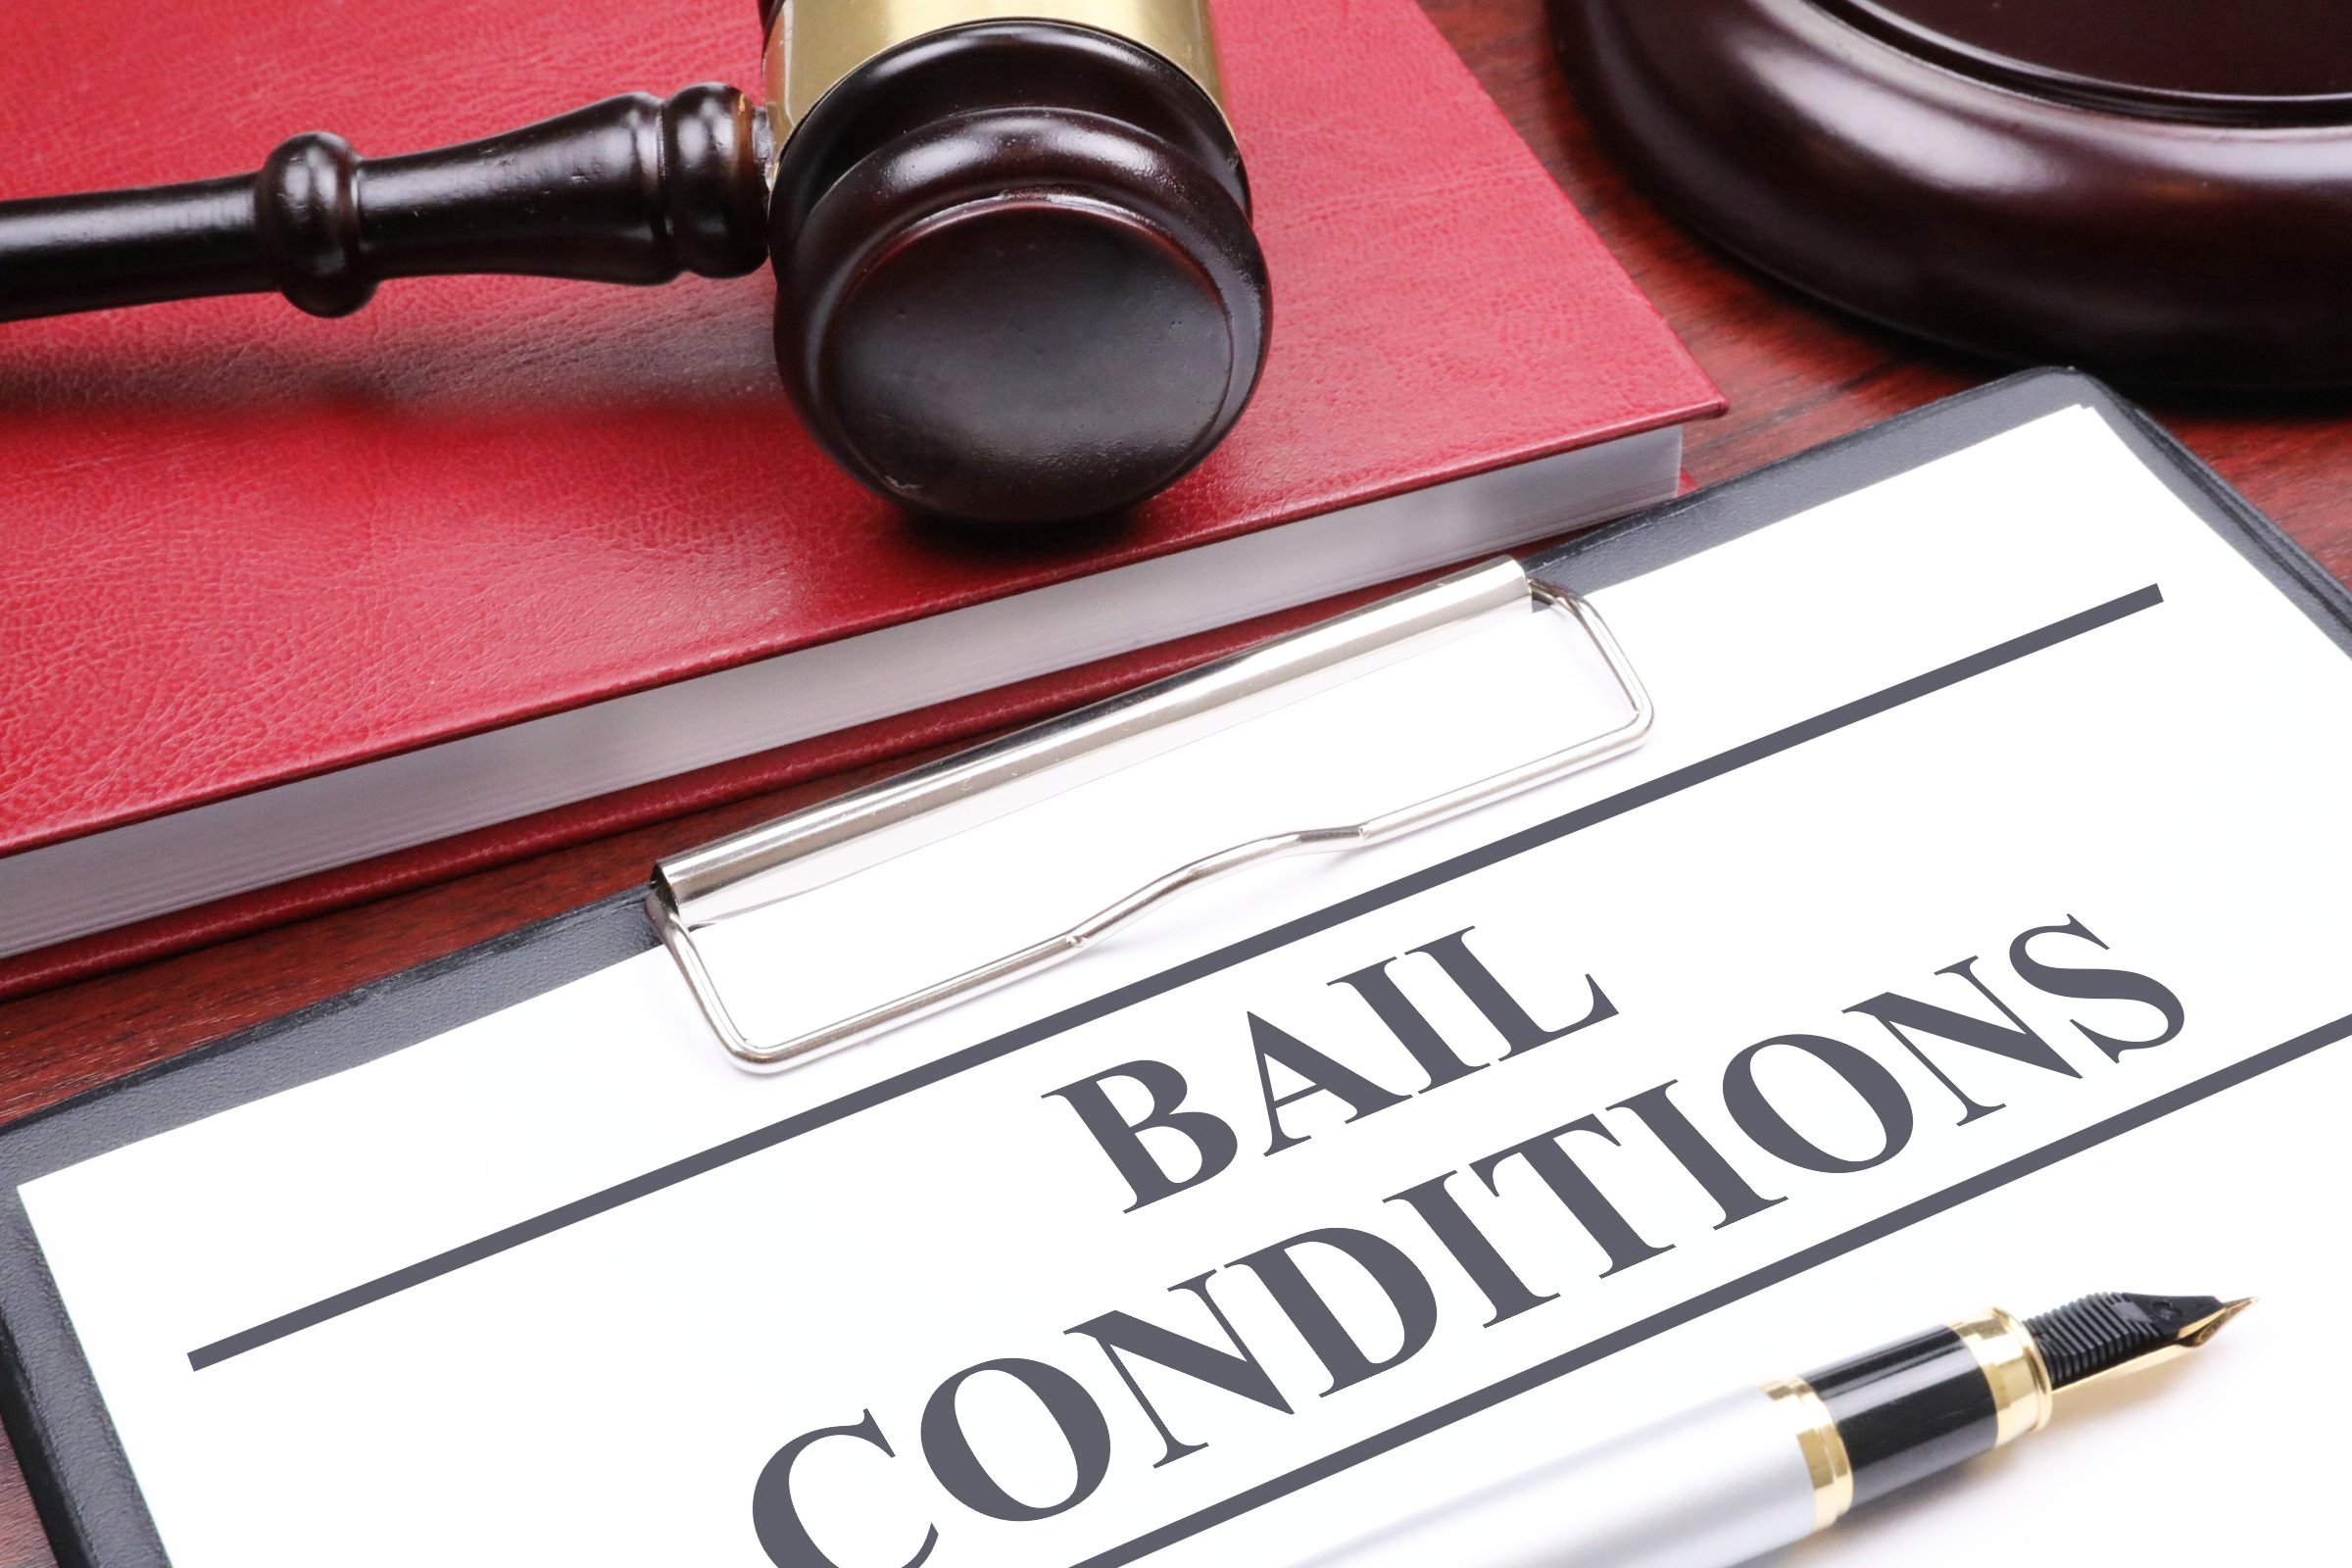 bail conditions